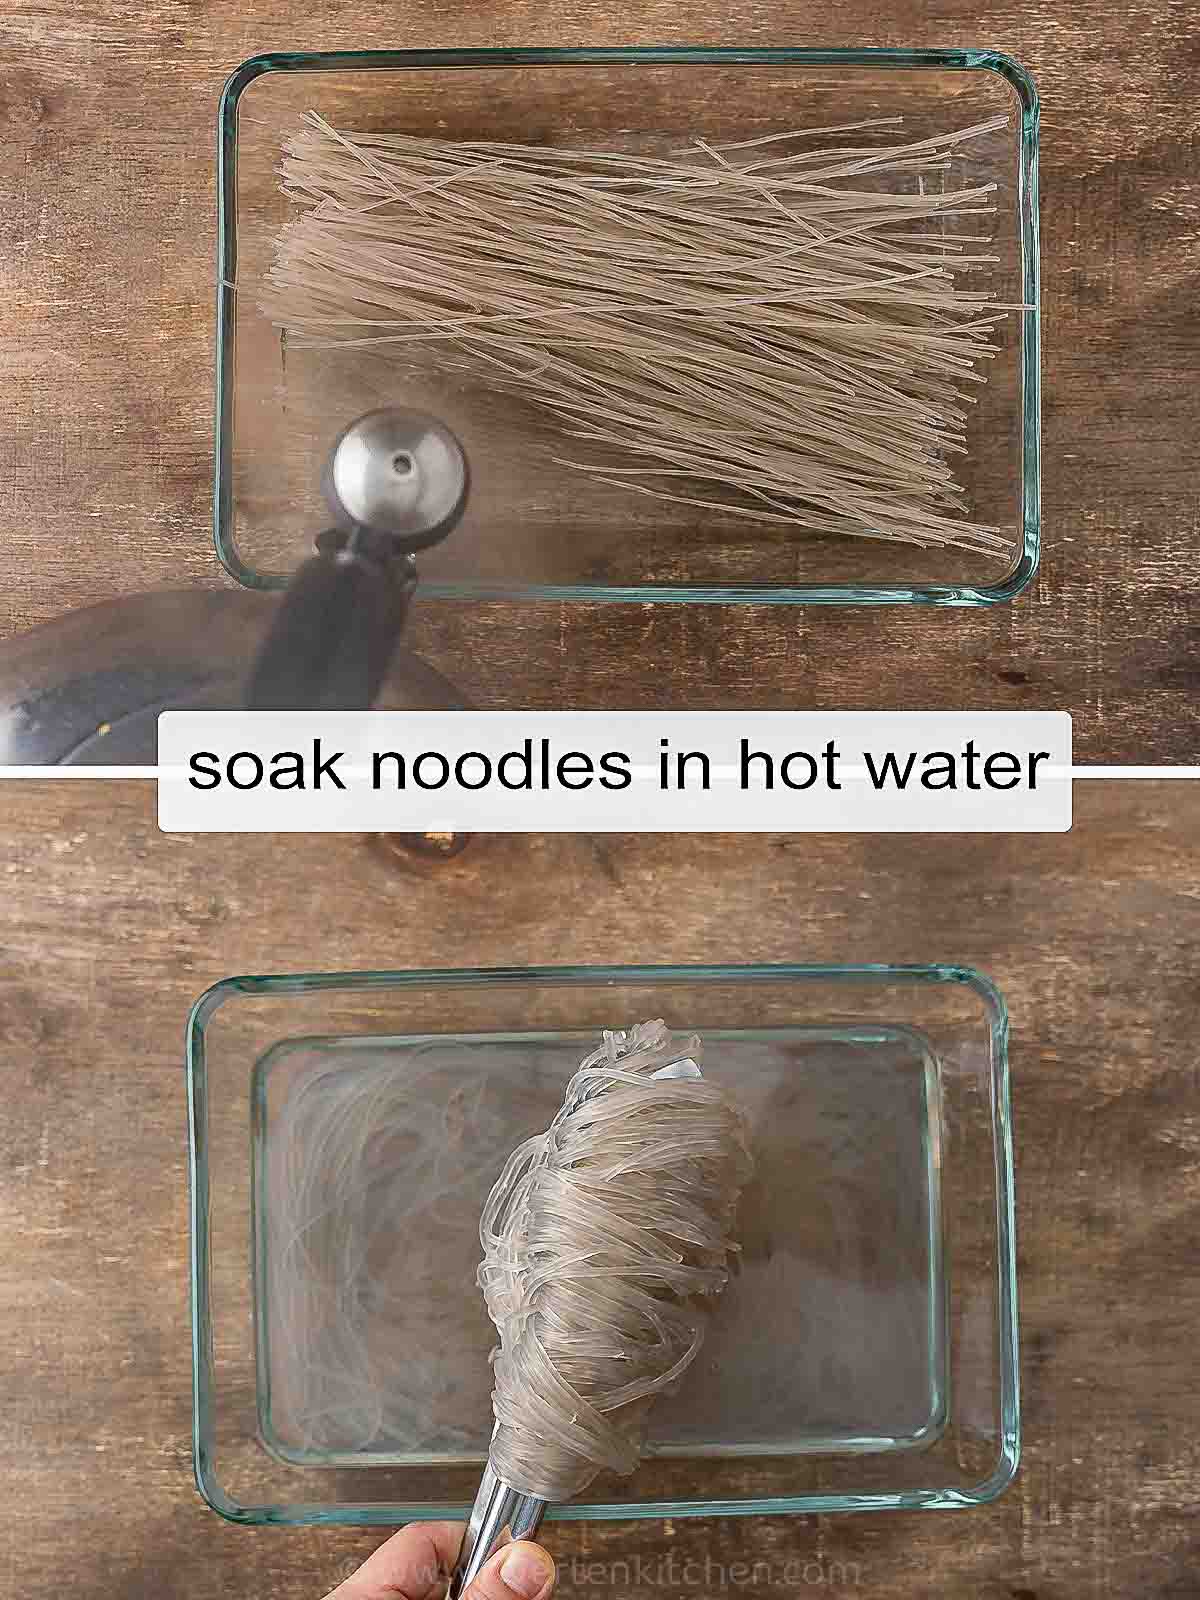 japchae noodles soaked in hot water.